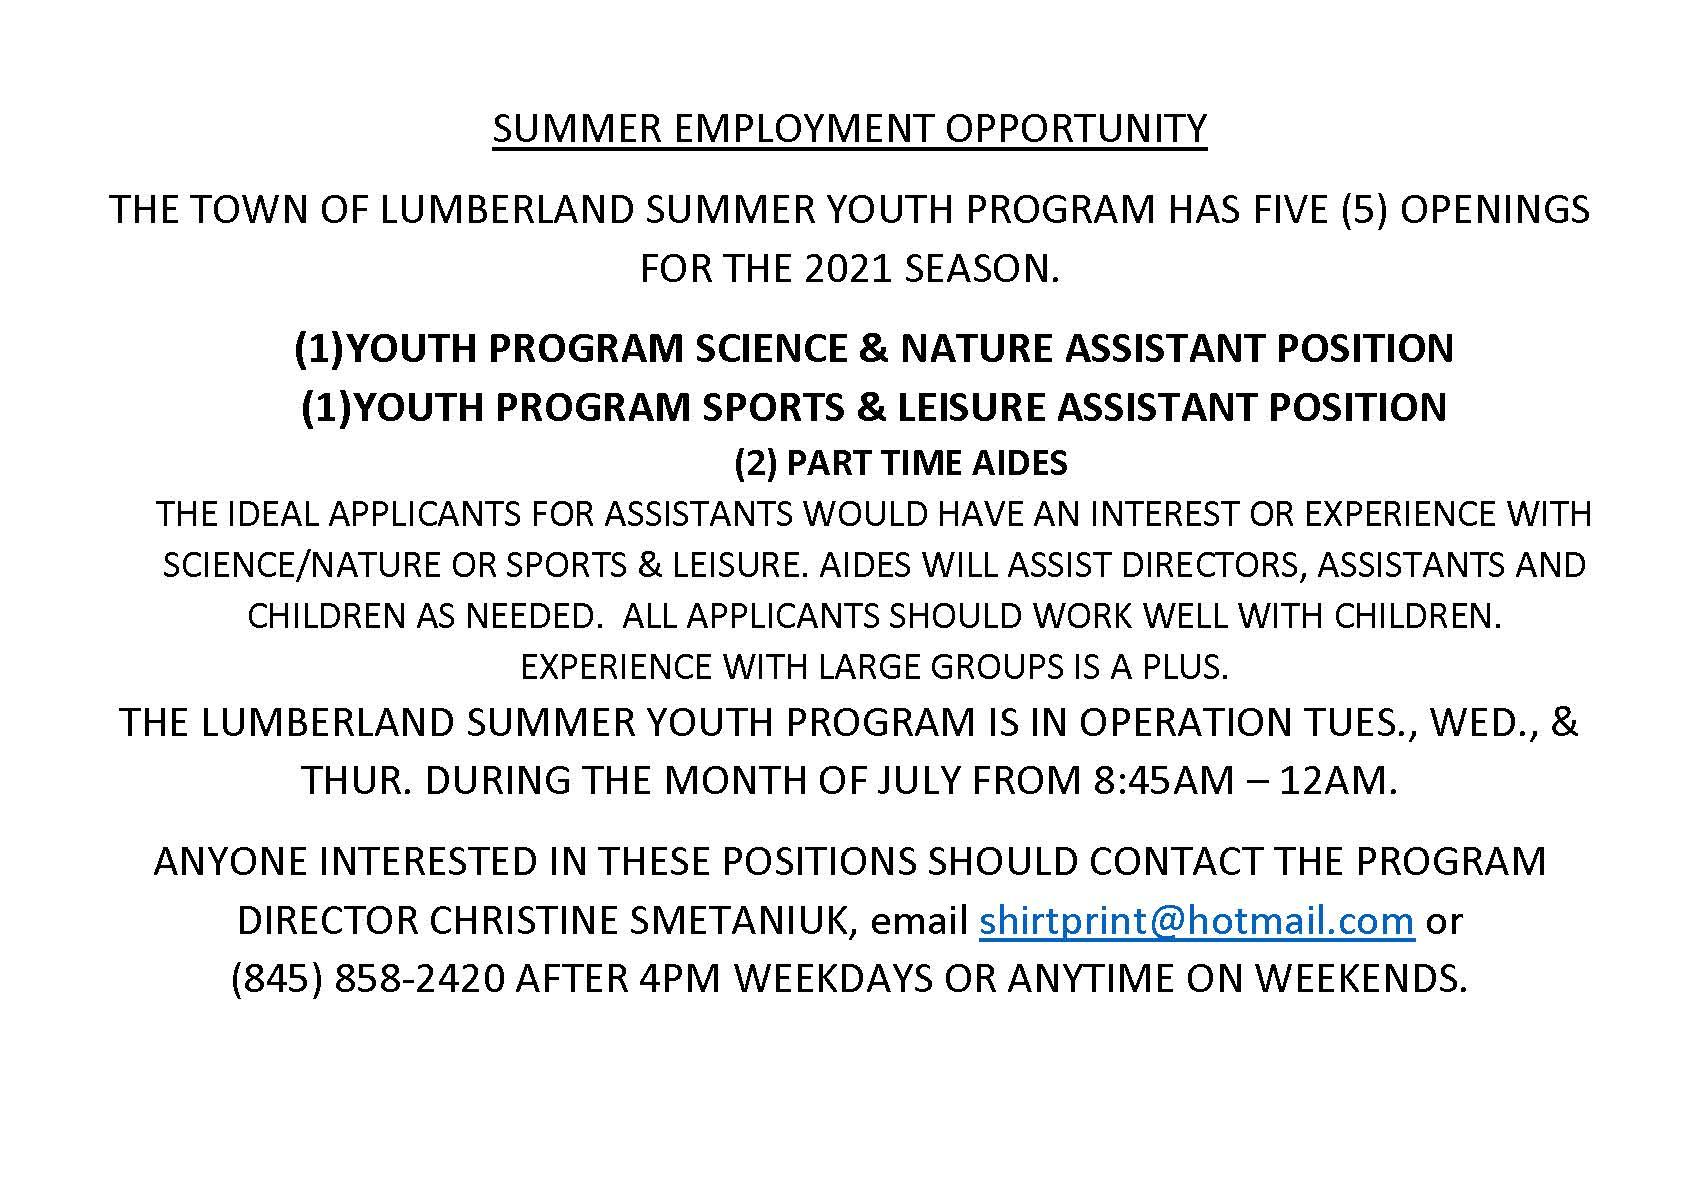 SUMMER EMPLOYMENT OPPORTUNITY - Copy